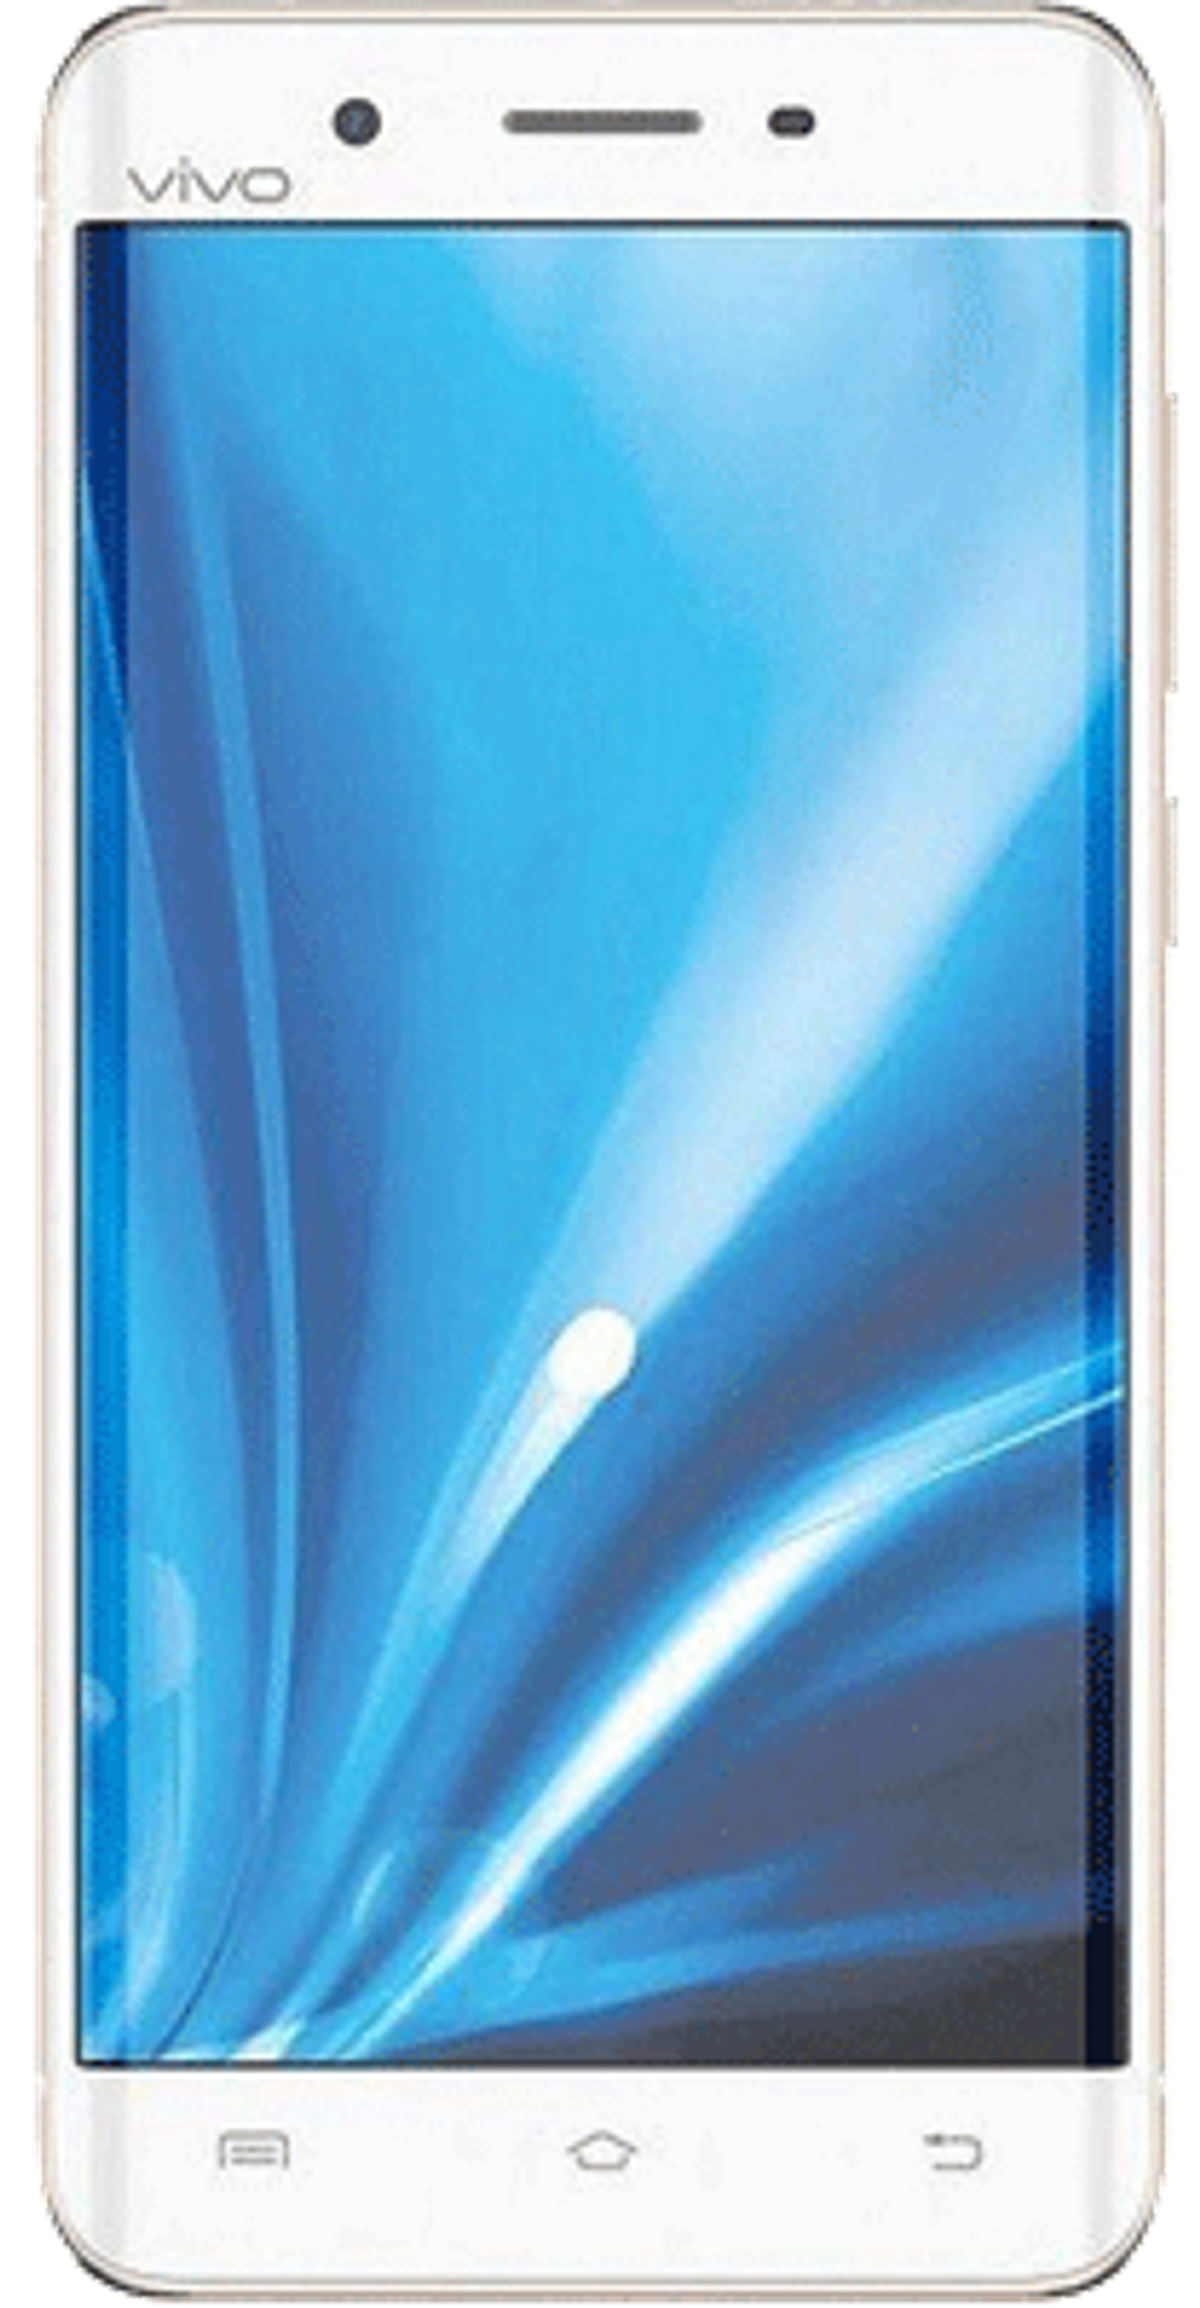 Vivo V3 Max Price in India, Full Specifications & Features - 2nd May